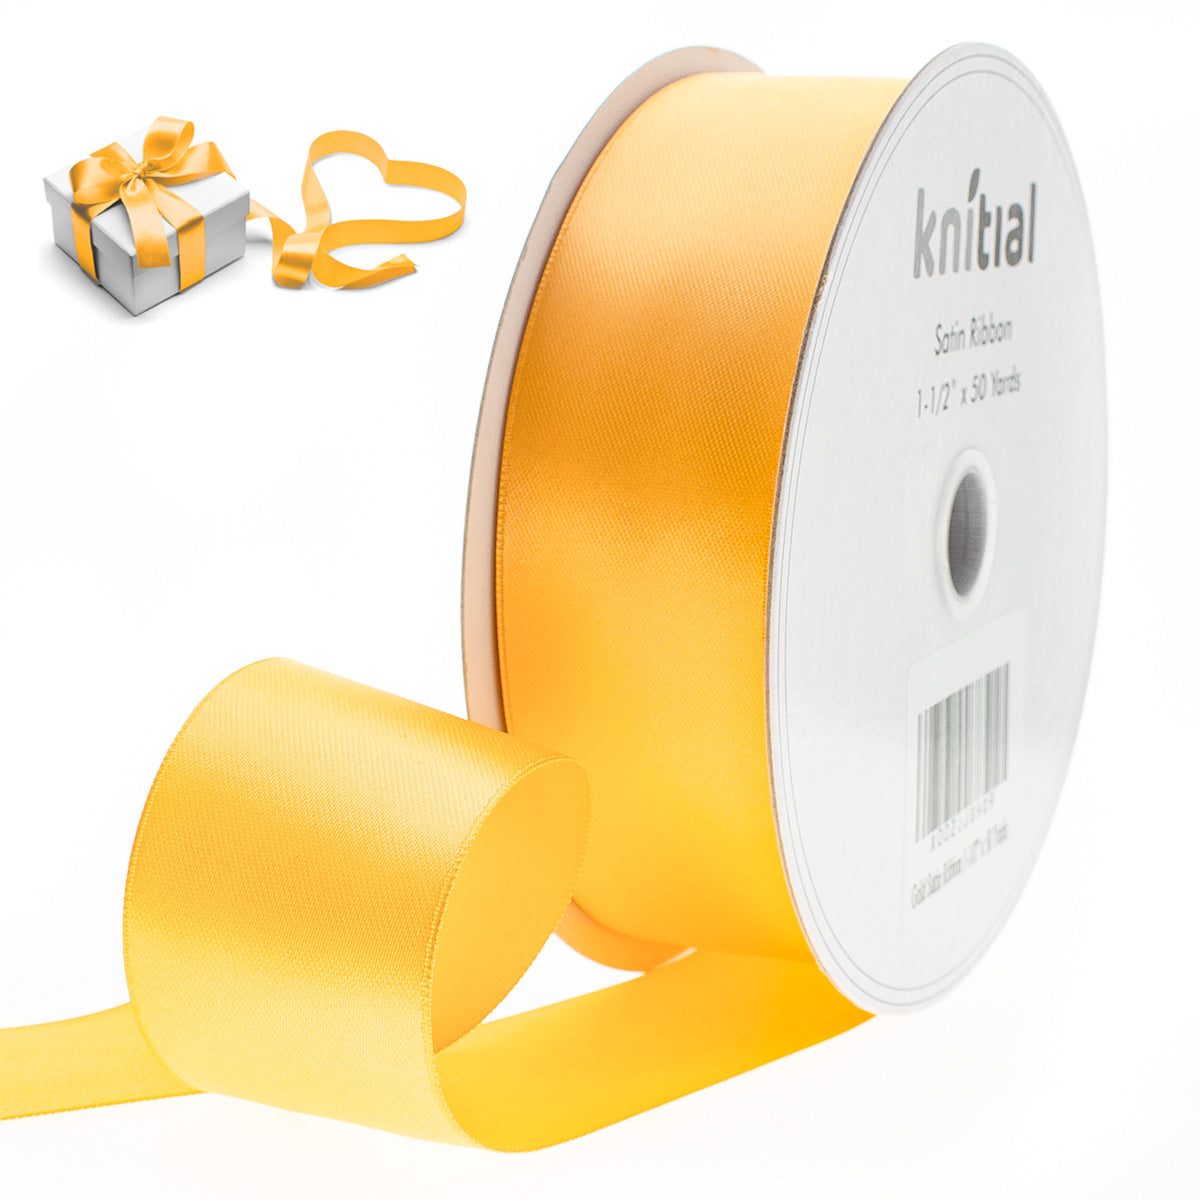 Knitial Double Faced Gold Satin Ribbon 1-1/2" x 50 Yards